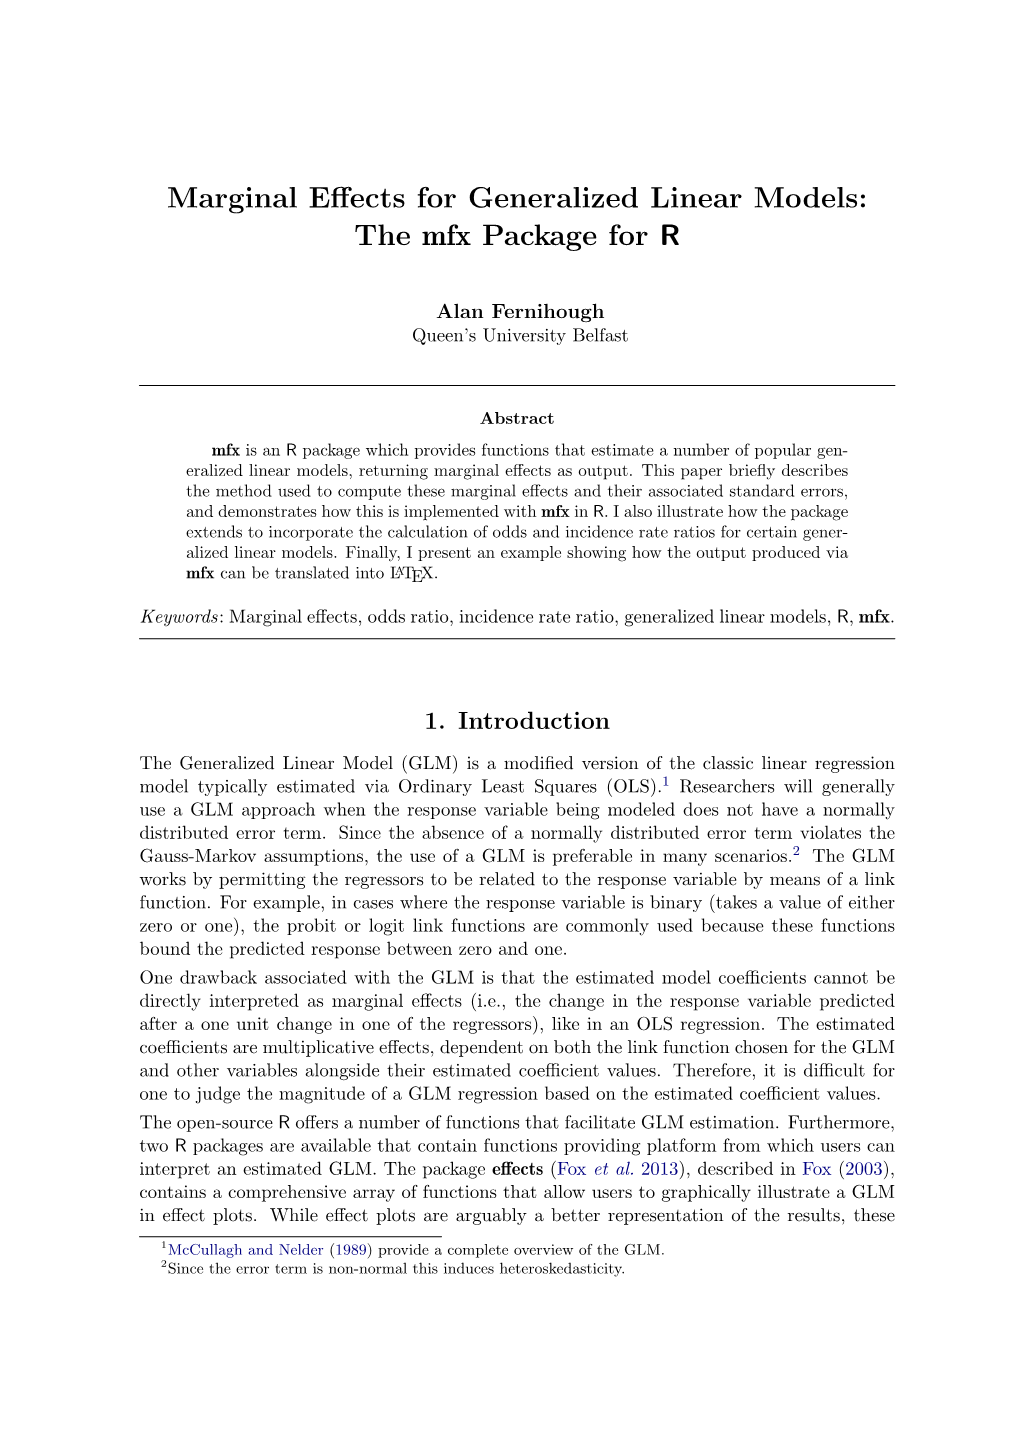 Marginal Effects for Generalized Linear Models: the Mfx Package for R